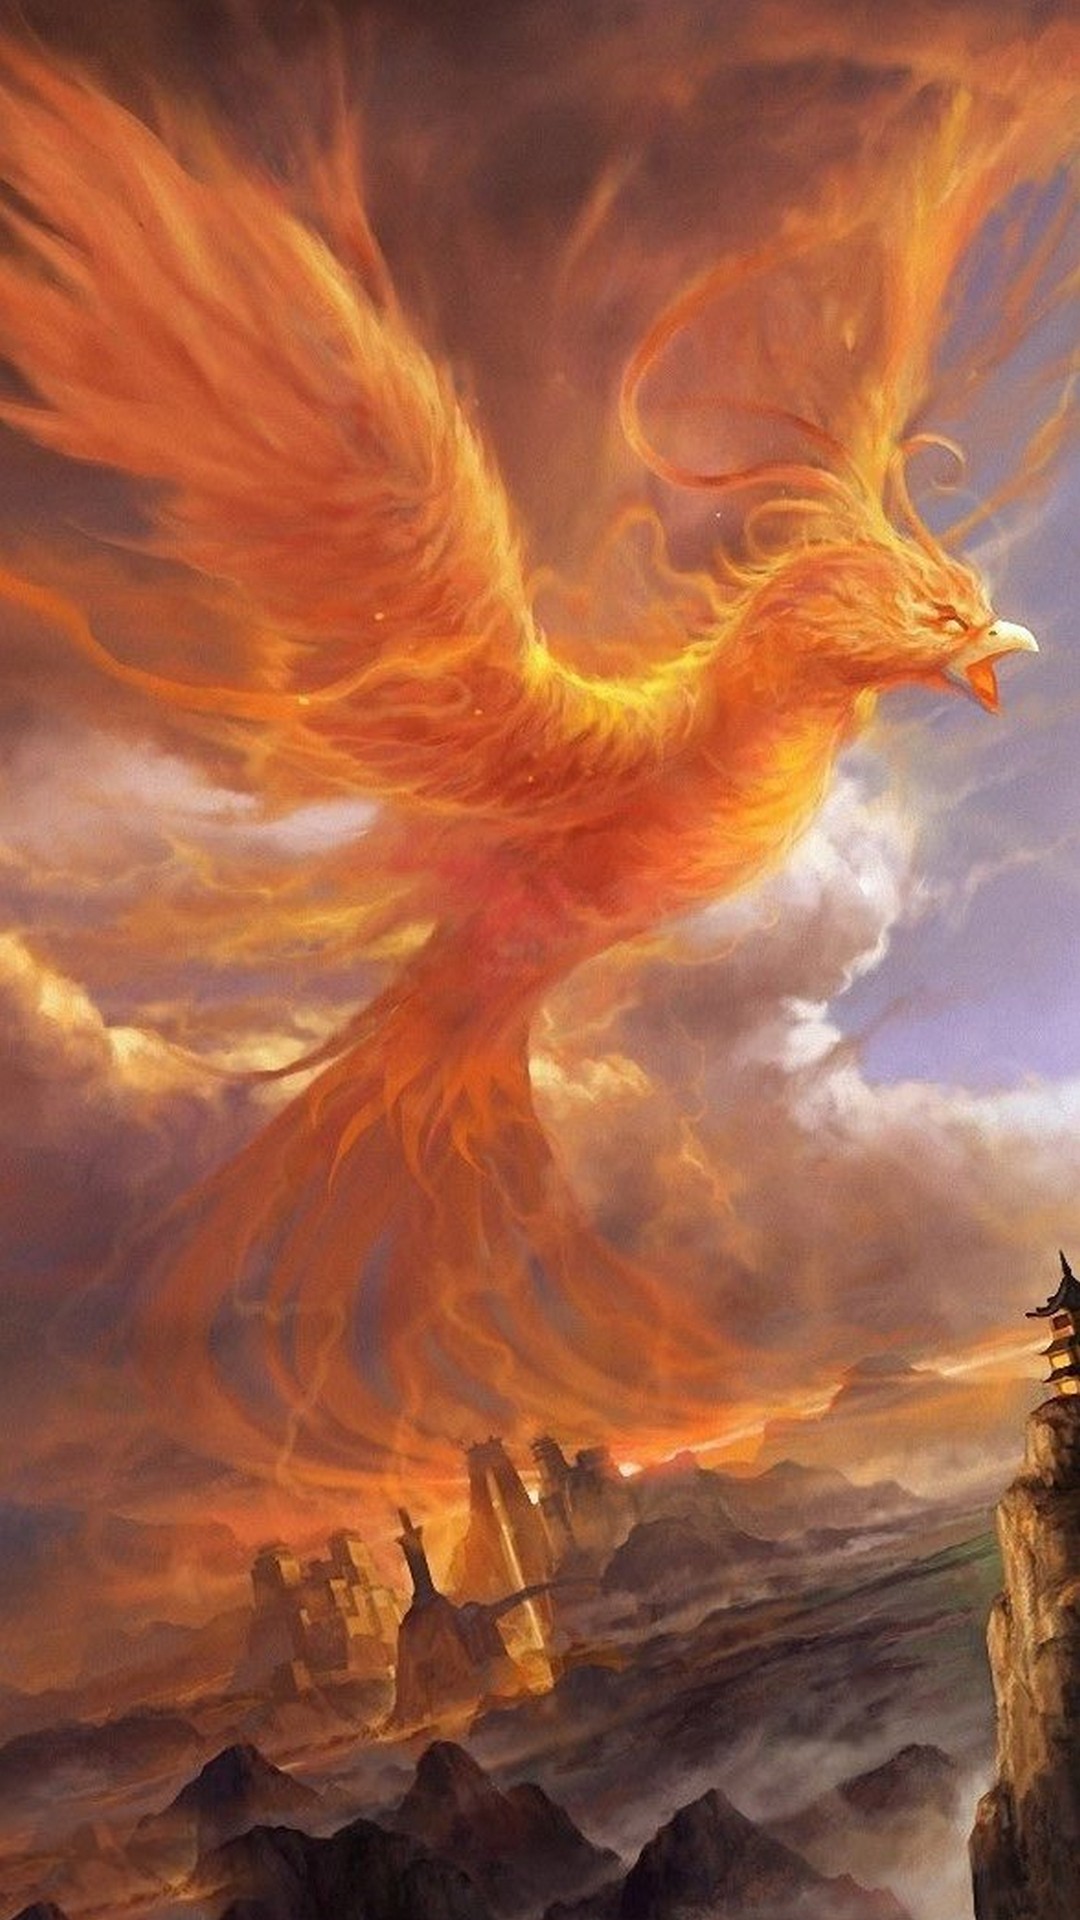 Wallpapers Phone Phoenix with image resolution 1080x1920 pixel. You can make this wallpaper for your Android backgrounds, Tablet, Smartphones Screensavers and Mobile Phone Lock Screen